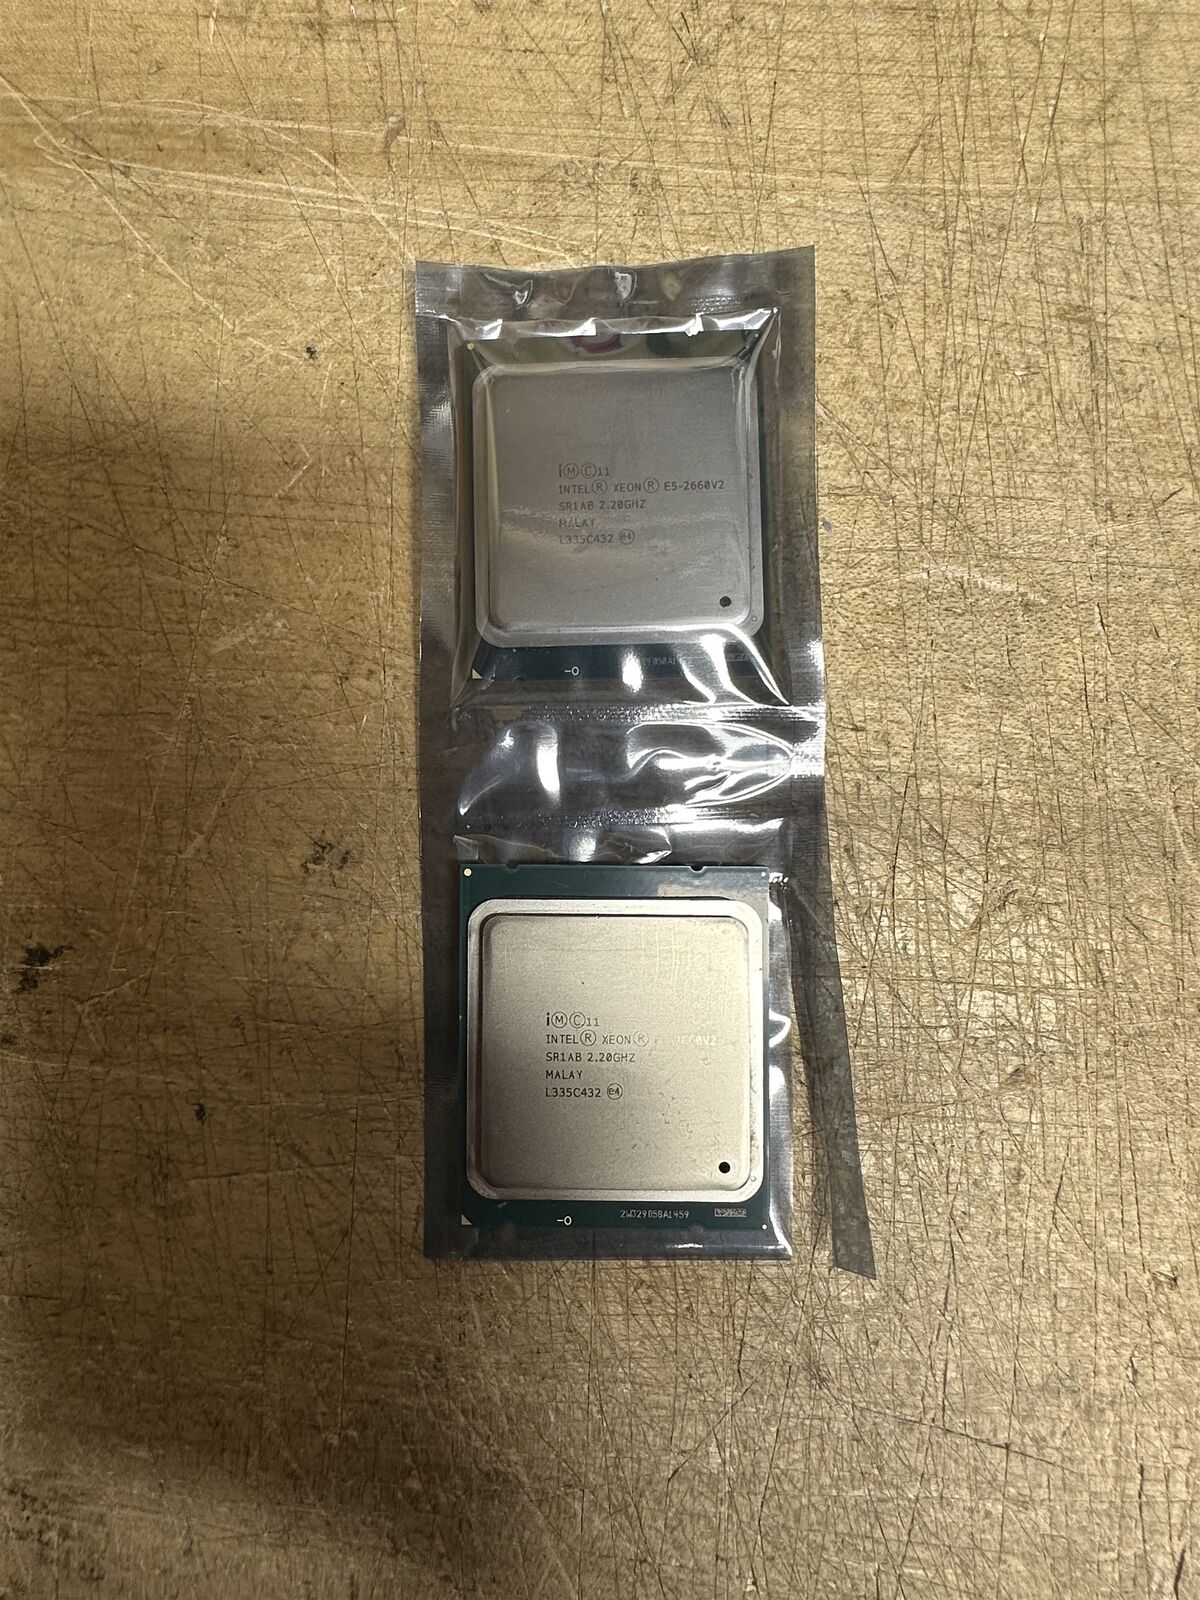 Lot of ONE MATCHED PAIR OF INTEL XEON e5-2660 V2 . 2.80GHz 